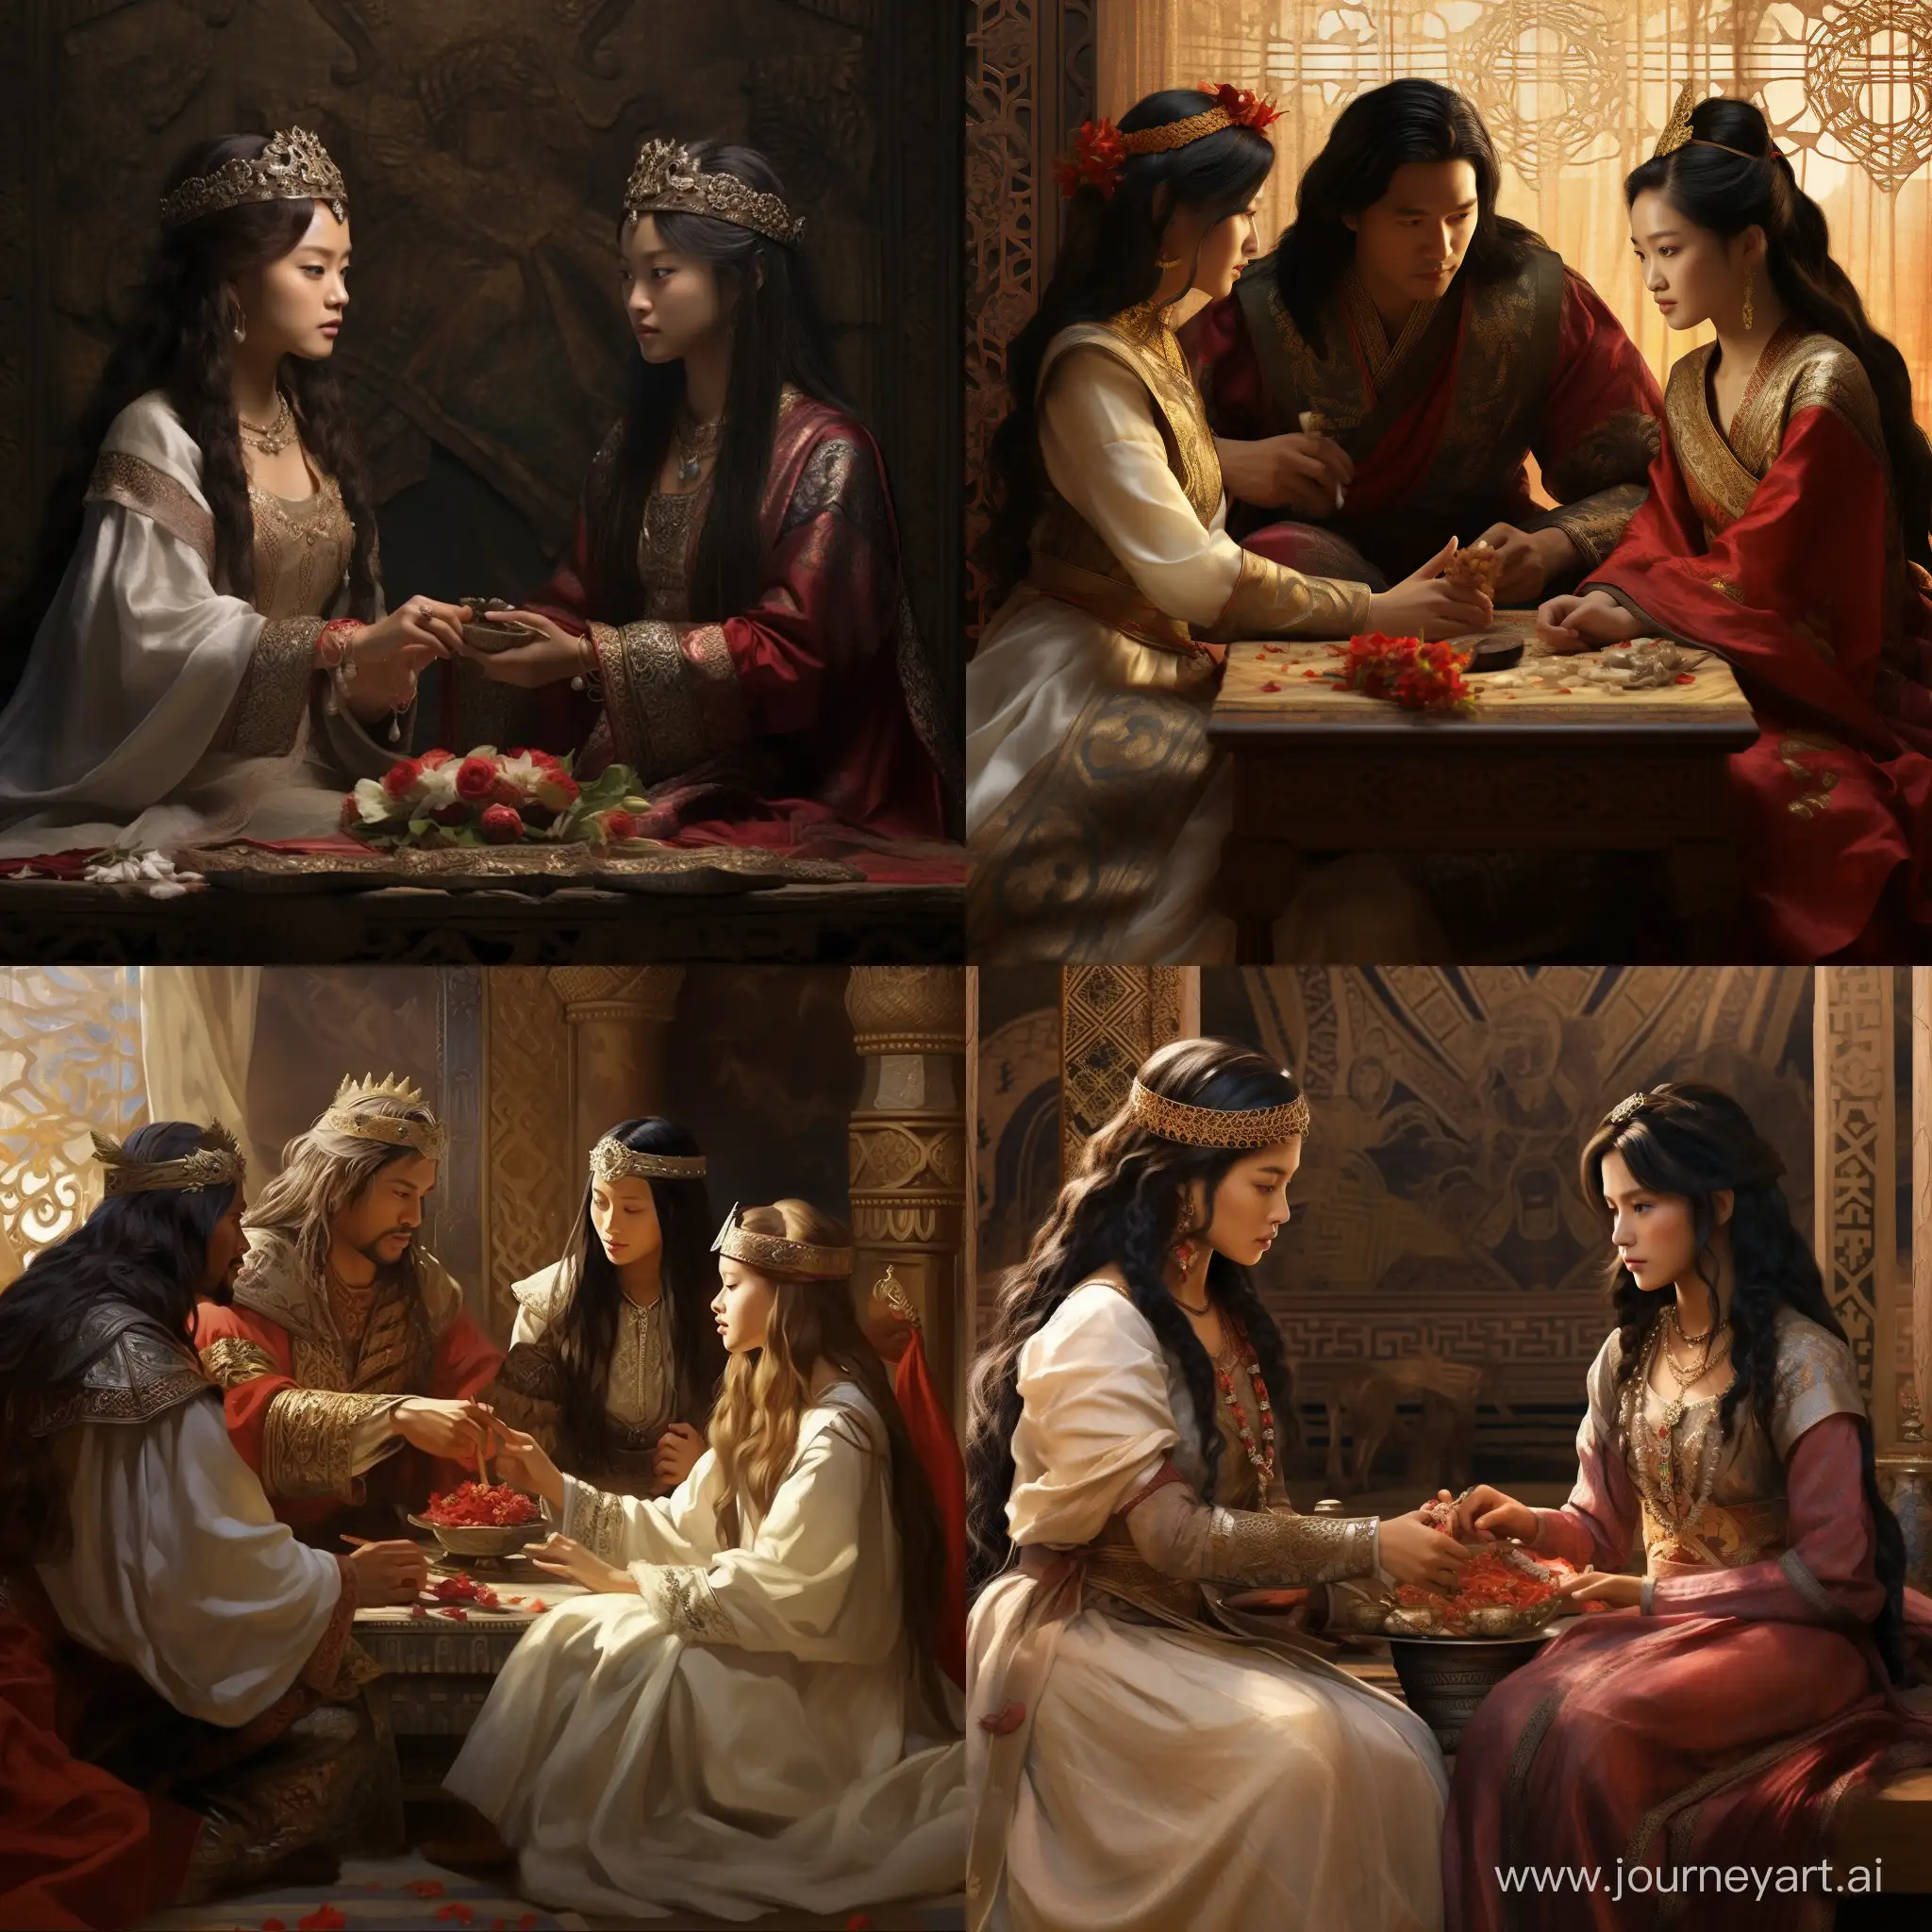 Genghis Khan's daughters negotiating marriage alliances with kings.Hyper realistic